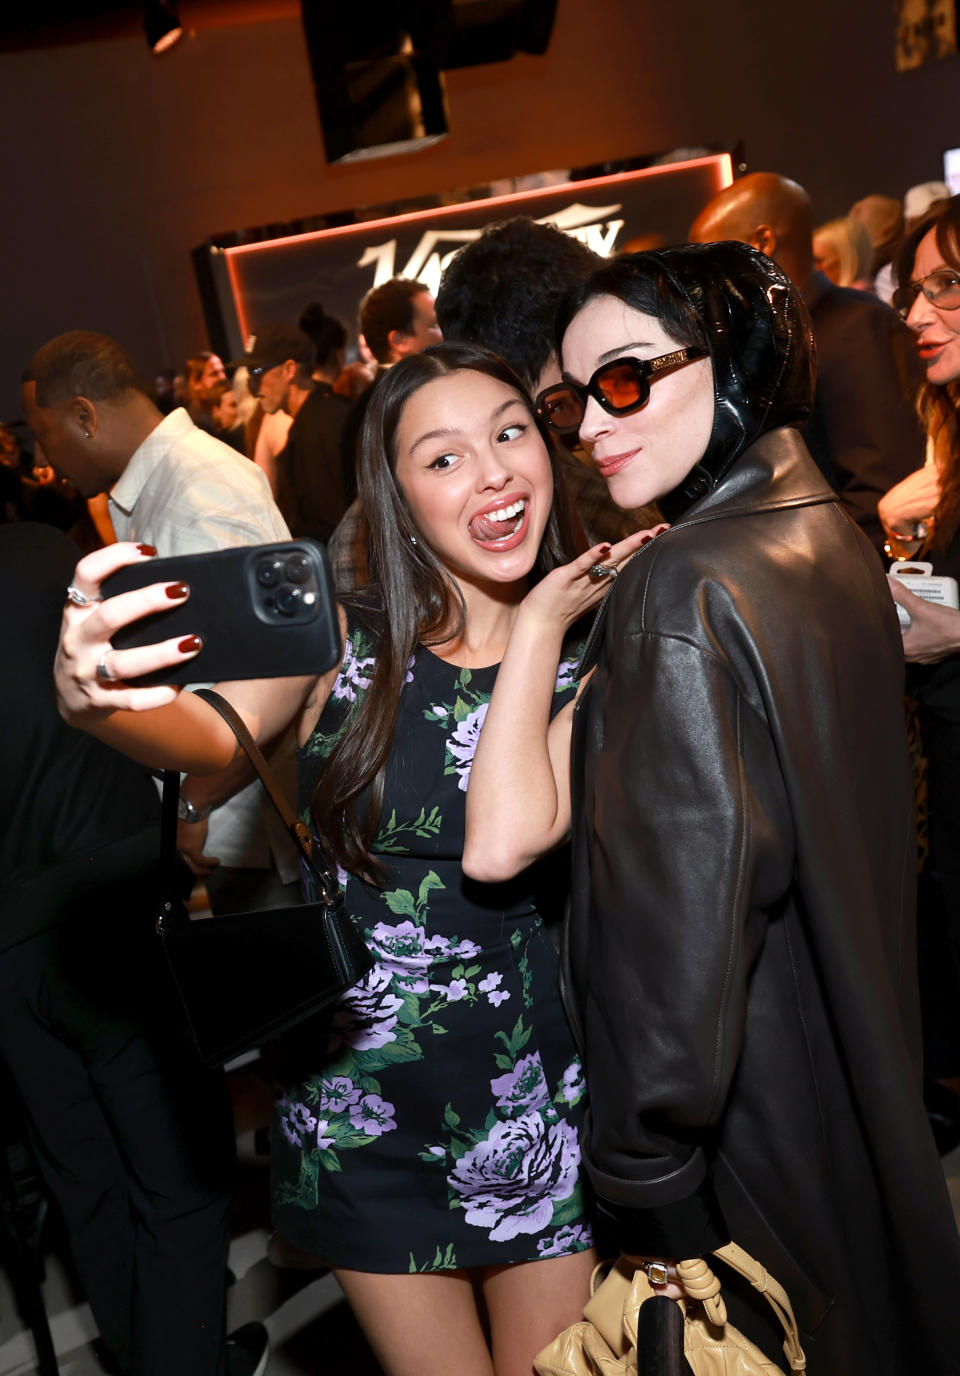 HOLLYWOOD, CALIFORNIA - DECEMBER 02: (L-R) Olivia Rodrigo and St. Vincent attend Variety's Hitmakers presented by Sony Audio on December 02, 2023 in Hollywood, California. (Photo by Matt Winkelmeyer/Variety via Getty Images)